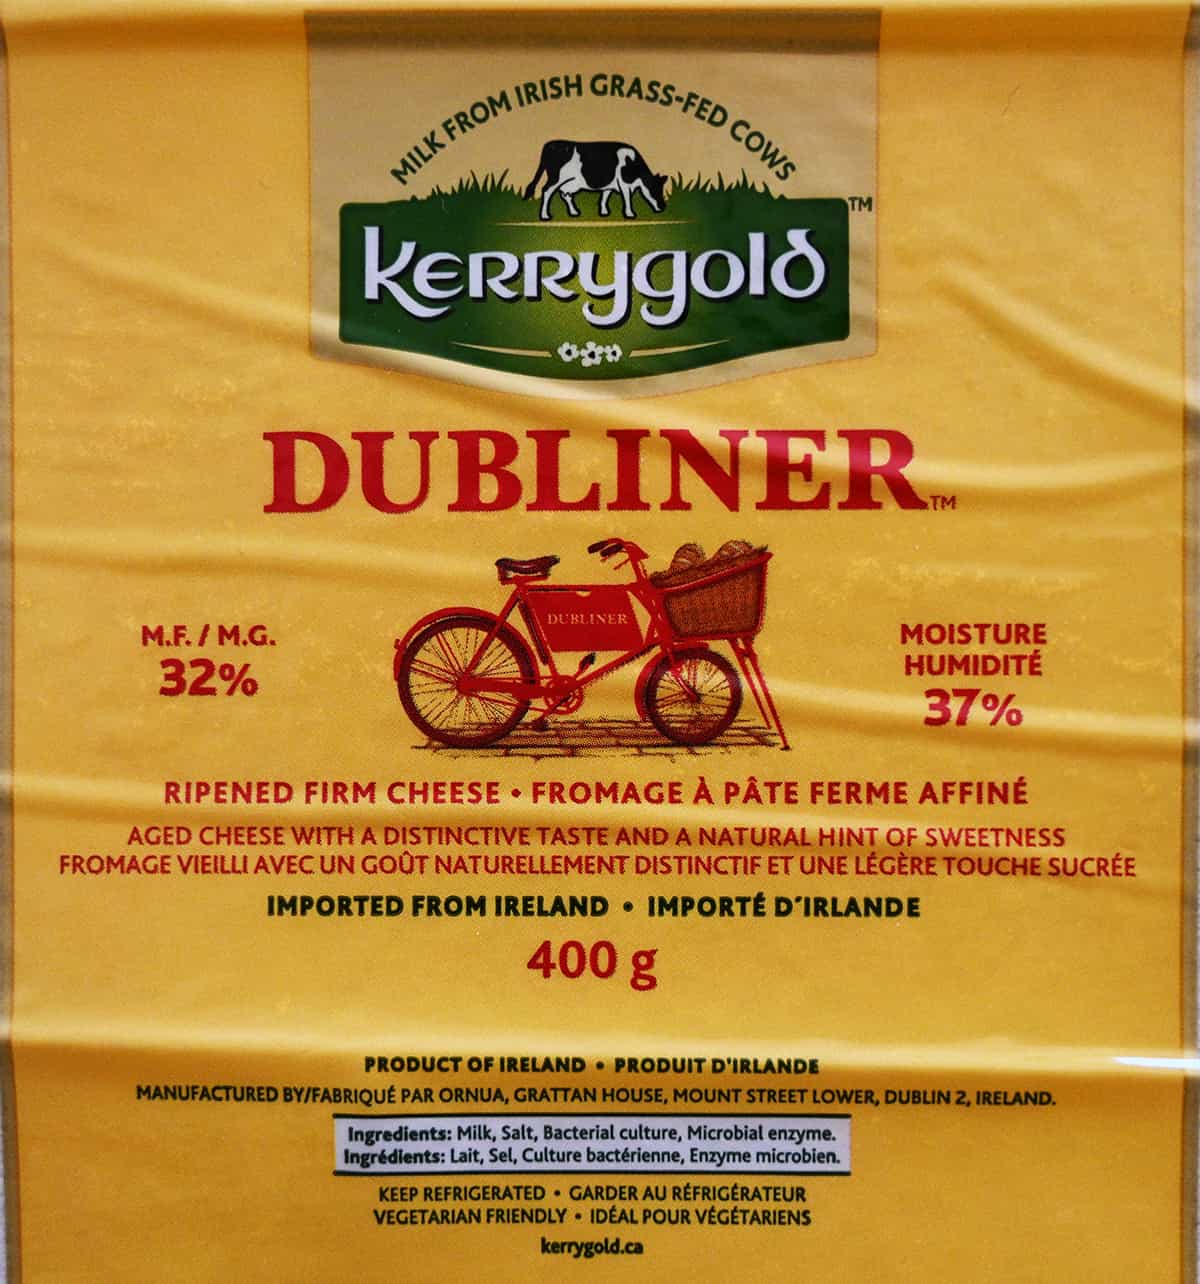 Closeup image of the front label of the Kerrygold Dubliner cheese.